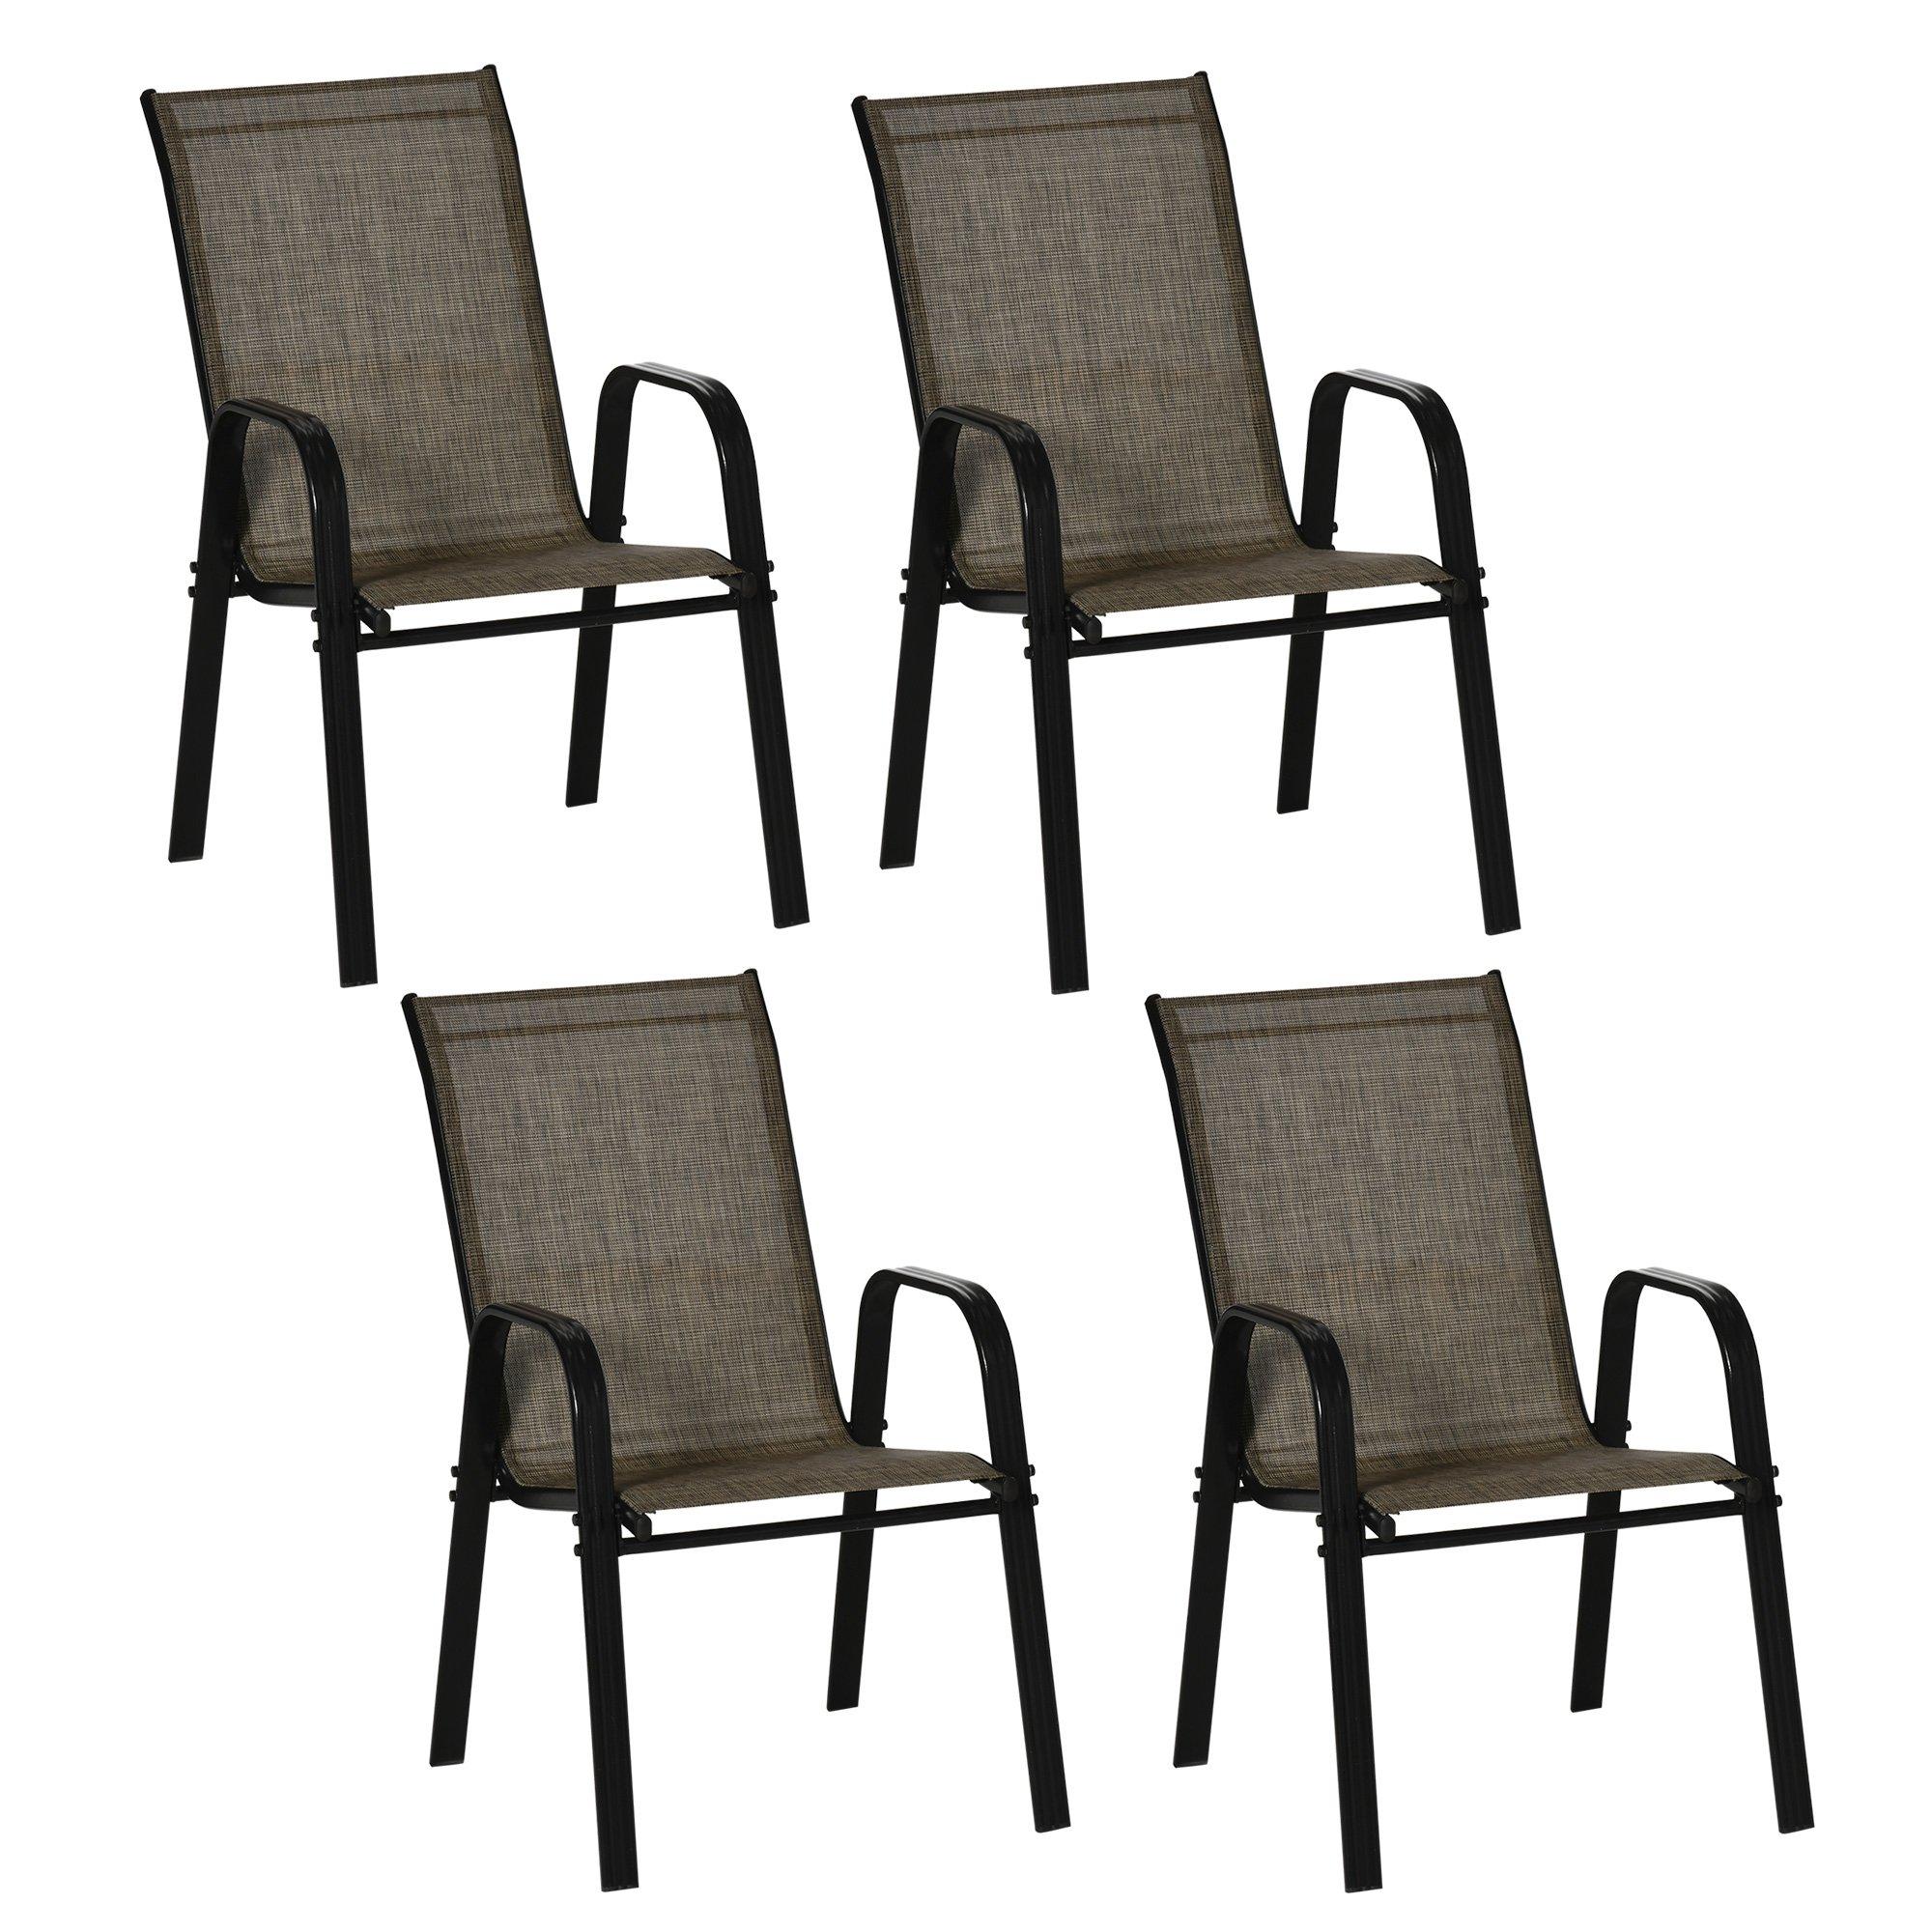 Set of 4 Garden Dining Chair Set Outdoor with High Back Armrest